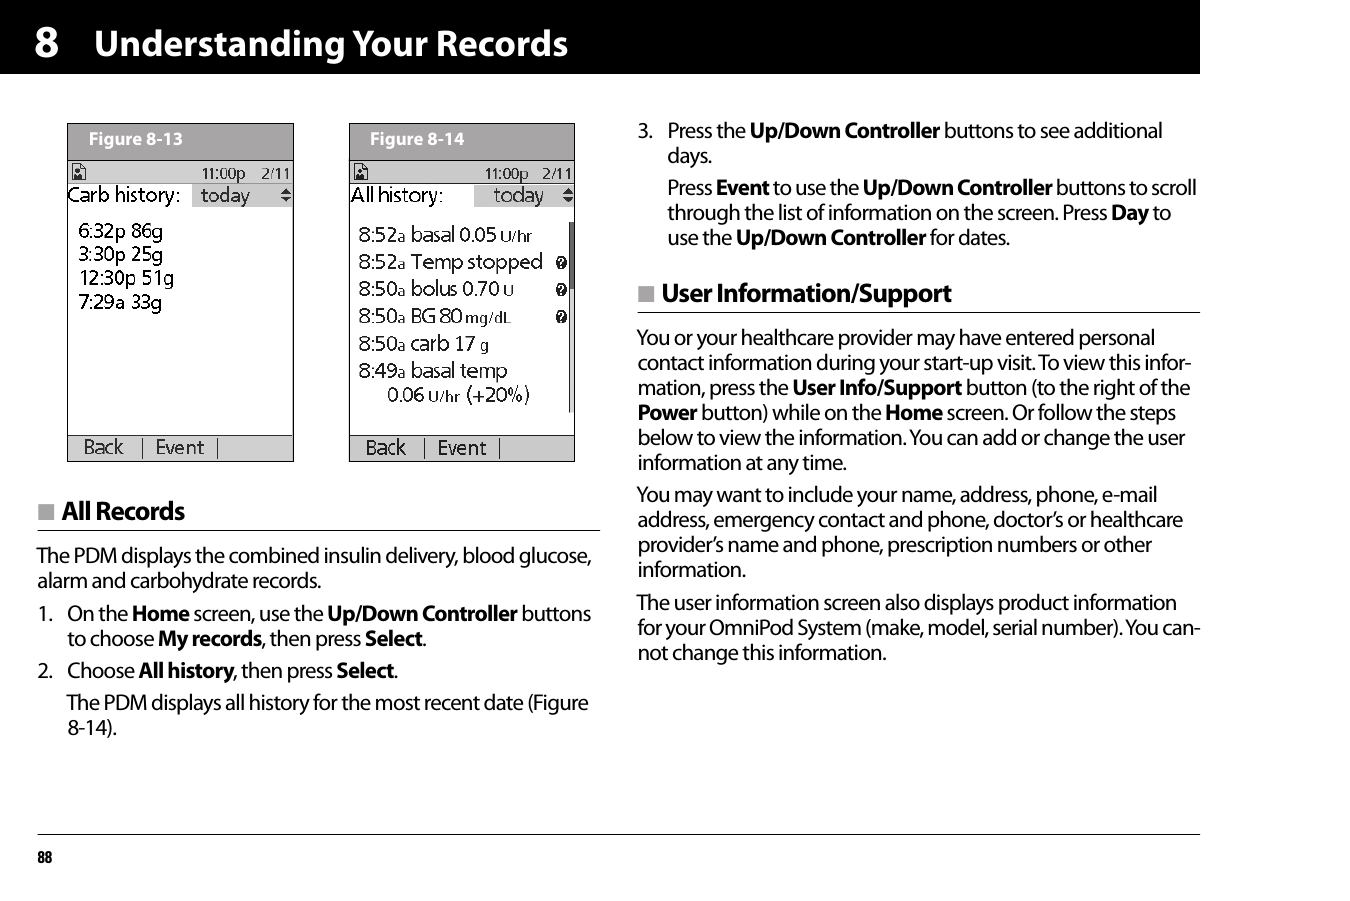 Understanding Your Records888n All RecordsThe PDM displays the combined insulin delivery, blood glucose, alarm and carbohydrate records.1. On the Home screen, use the Up/Down Controller buttons to choose My records, then press Select.2. Choose All history, then press Select.The PDM displays all history for the most recent date (Figure 8-14).3. Press the Up/Down Controller buttons to see additional days.Press Event to use the Up/Down Controller buttons to scroll through the list of information on the screen. Press Day to use the Up/Down Controller for dates.n User Information/SupportYou or your healthcare provider may have entered personal contact information during your start-up visit. To view this infor-mation, press the User Info/Support button (to the right of the Power button) while on the Home screen. Or follow the steps below to view the information. You can add or change the user information at any time.You may want to include your name, address, phone, e-mail address, emergency contact and phone, doctor’s or healthcare provider’s name and phone, prescription numbers or other information.The user information screen also displays product information for your OmniPod System (make, model, serial number). You can-not change this information.Figure 8-13 Figure 8-14